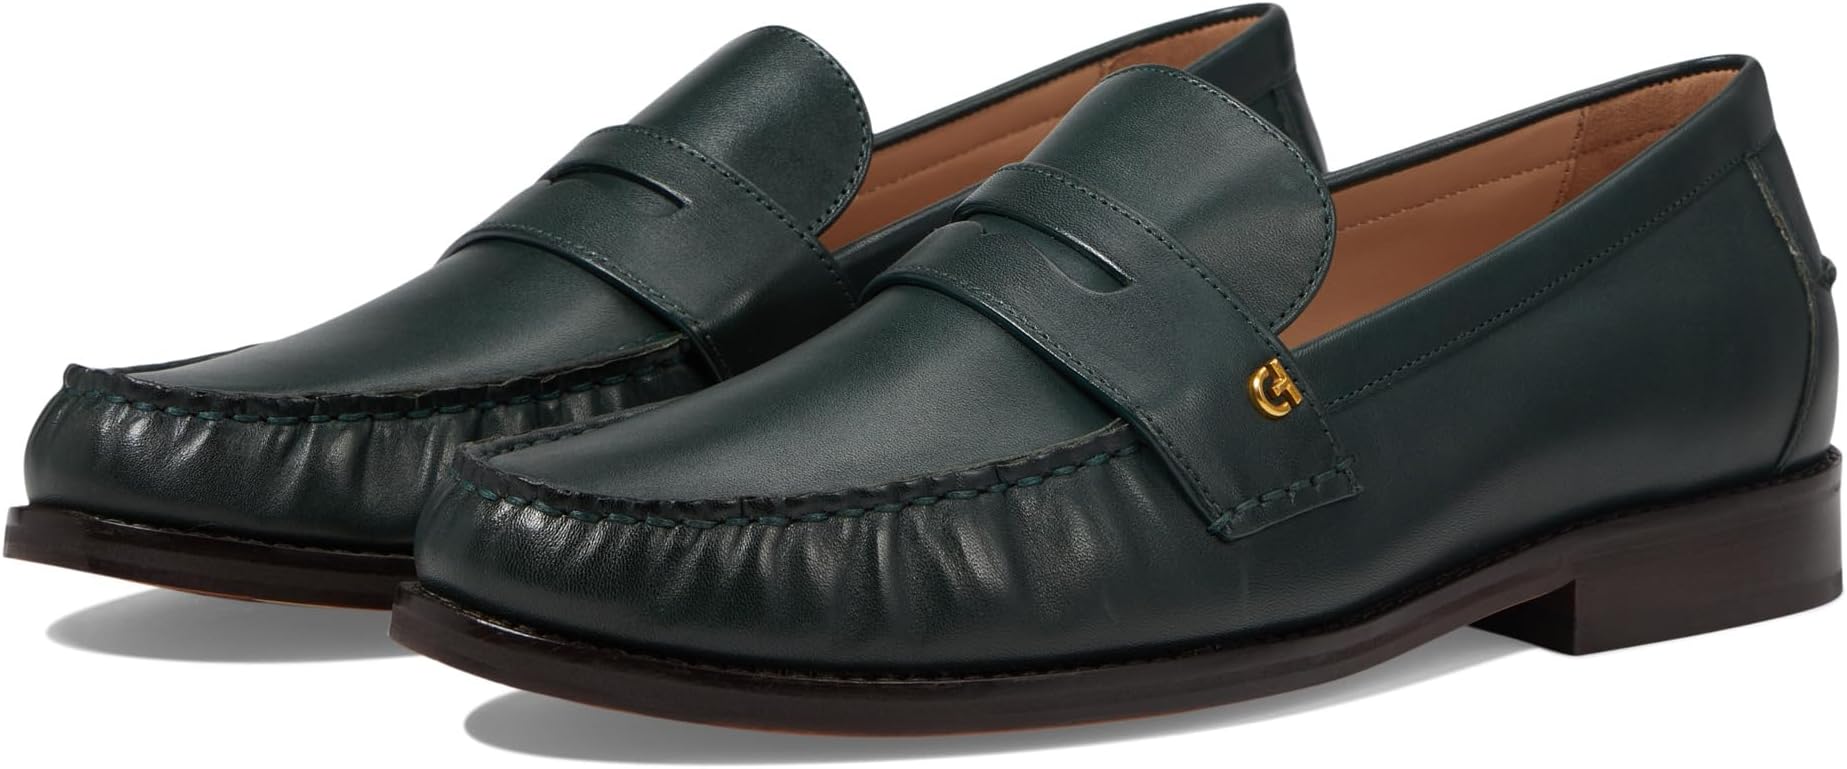 Лоферы Lux Pinch Penny Loafer Cole Haan, цвет Scarab Leather цена и фото